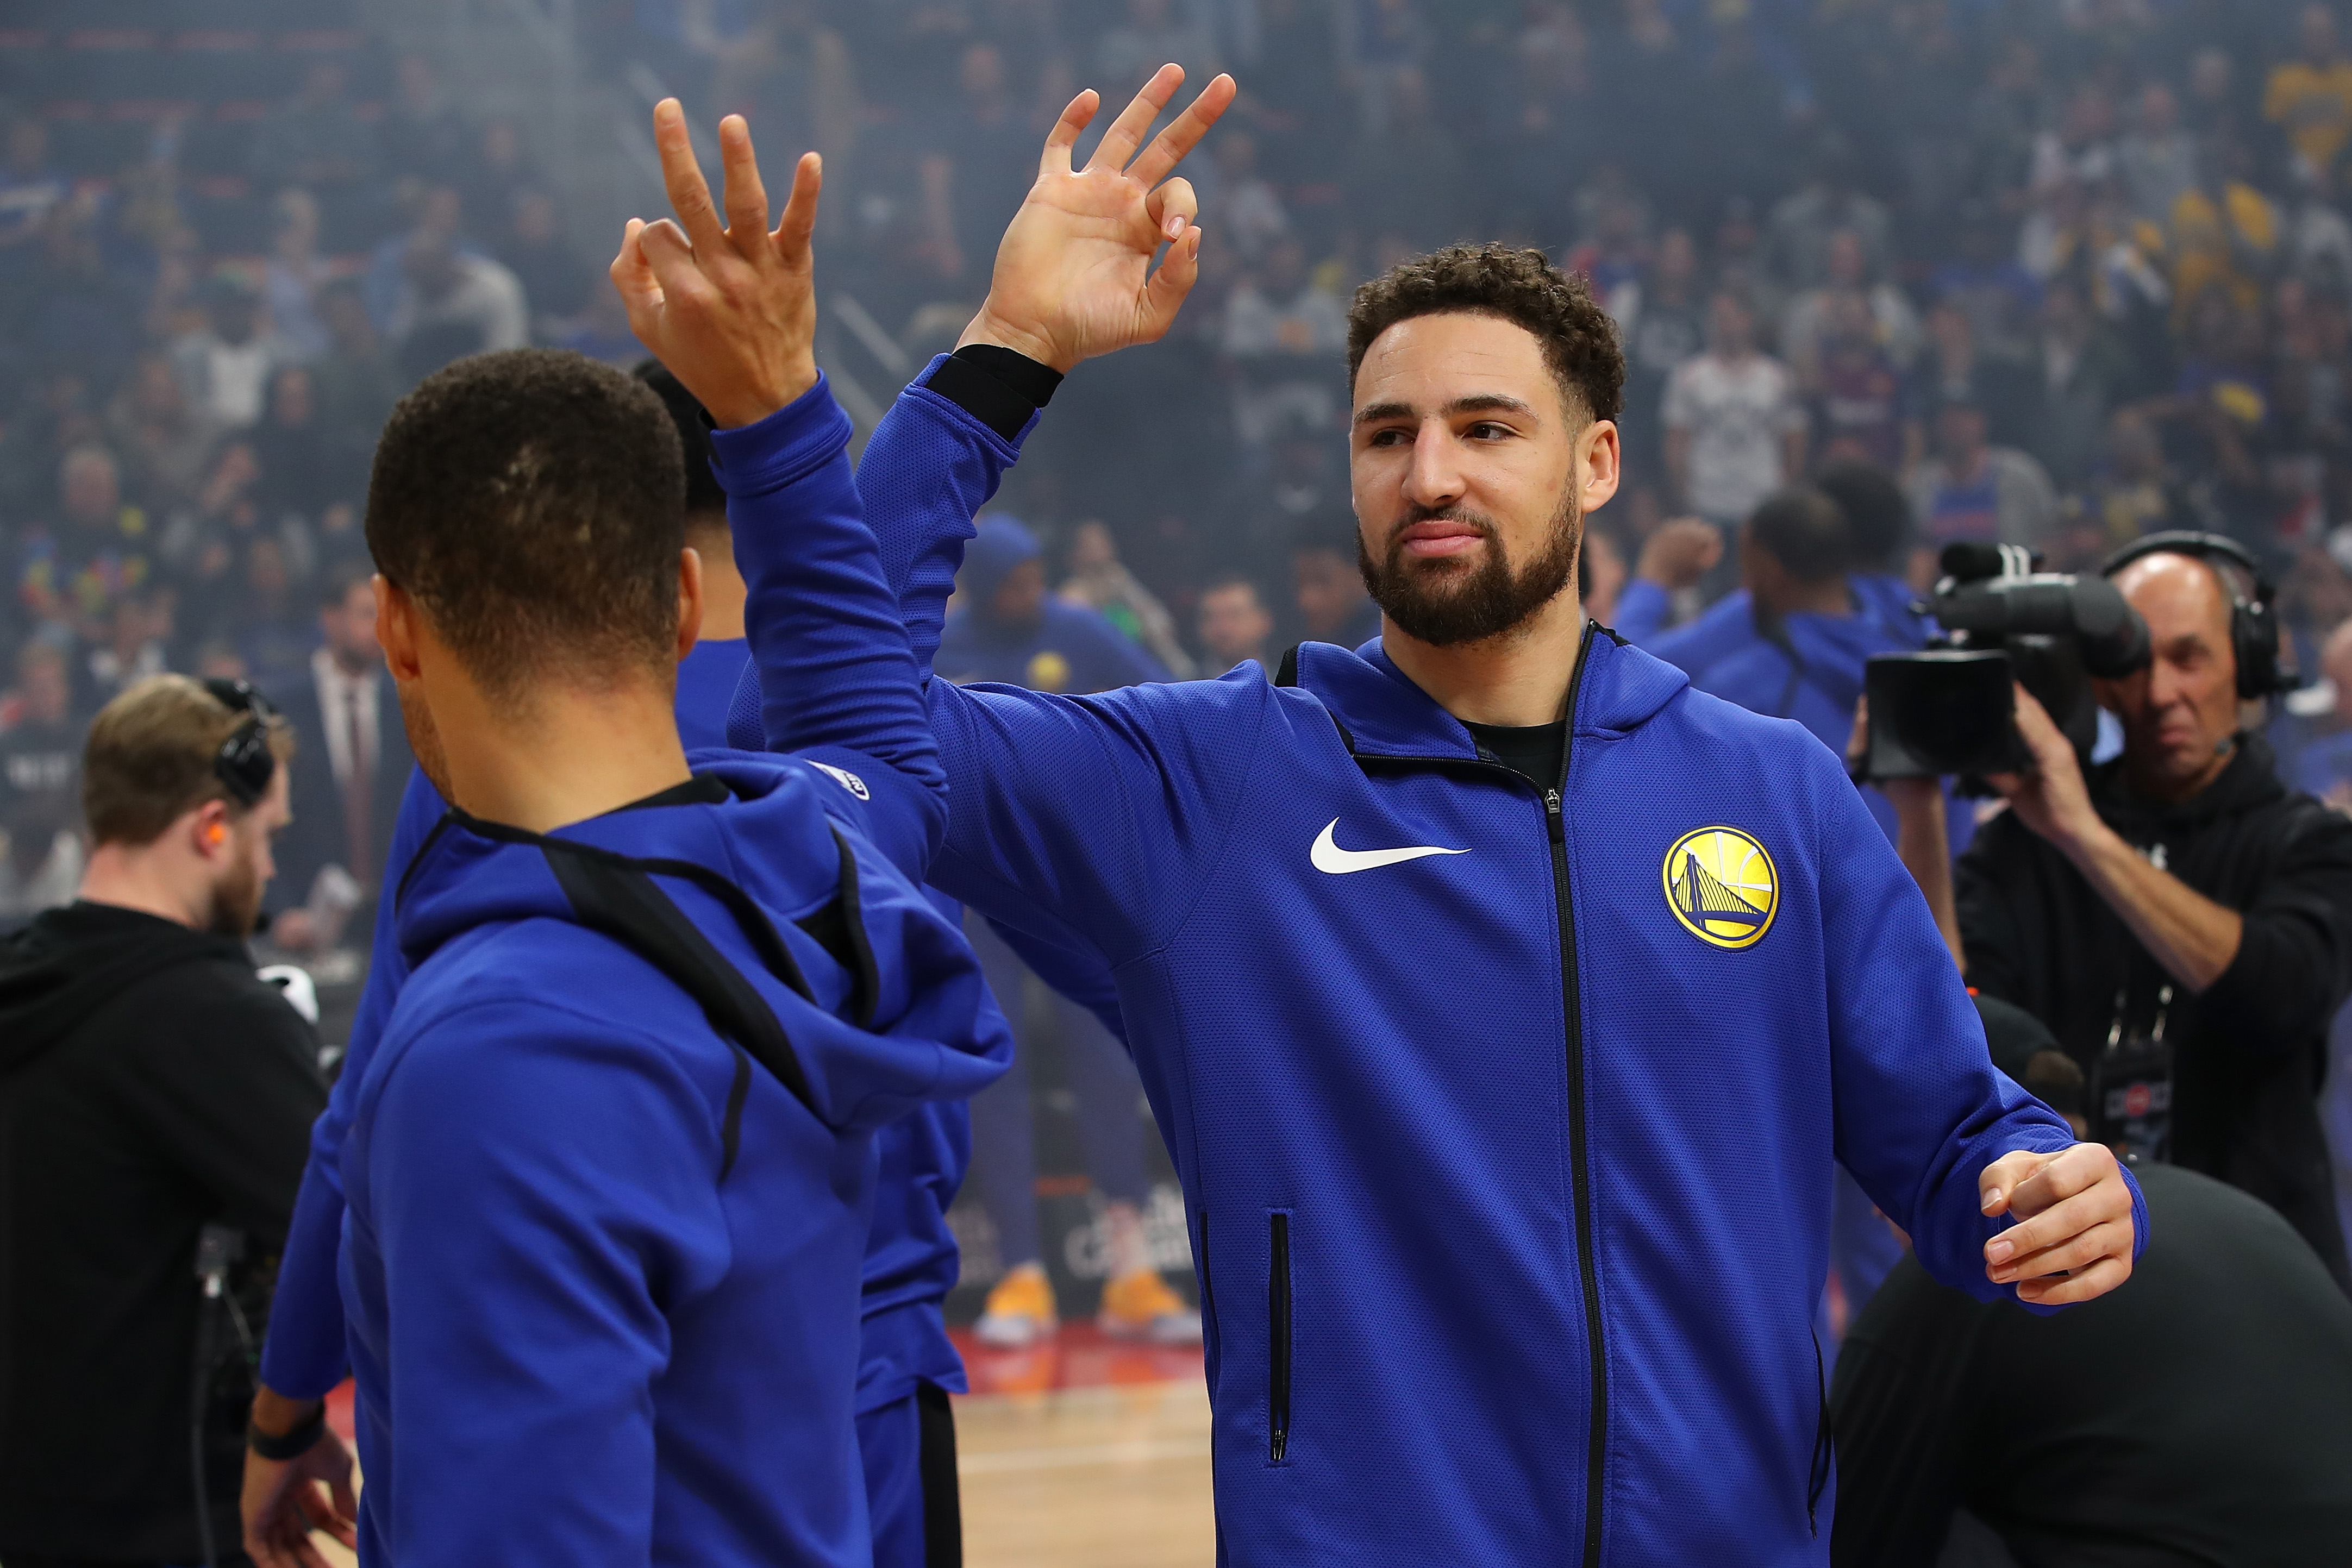 WATCH: Klay Thompson Scores 43, Dribbles Only Four Times | Heavy.com